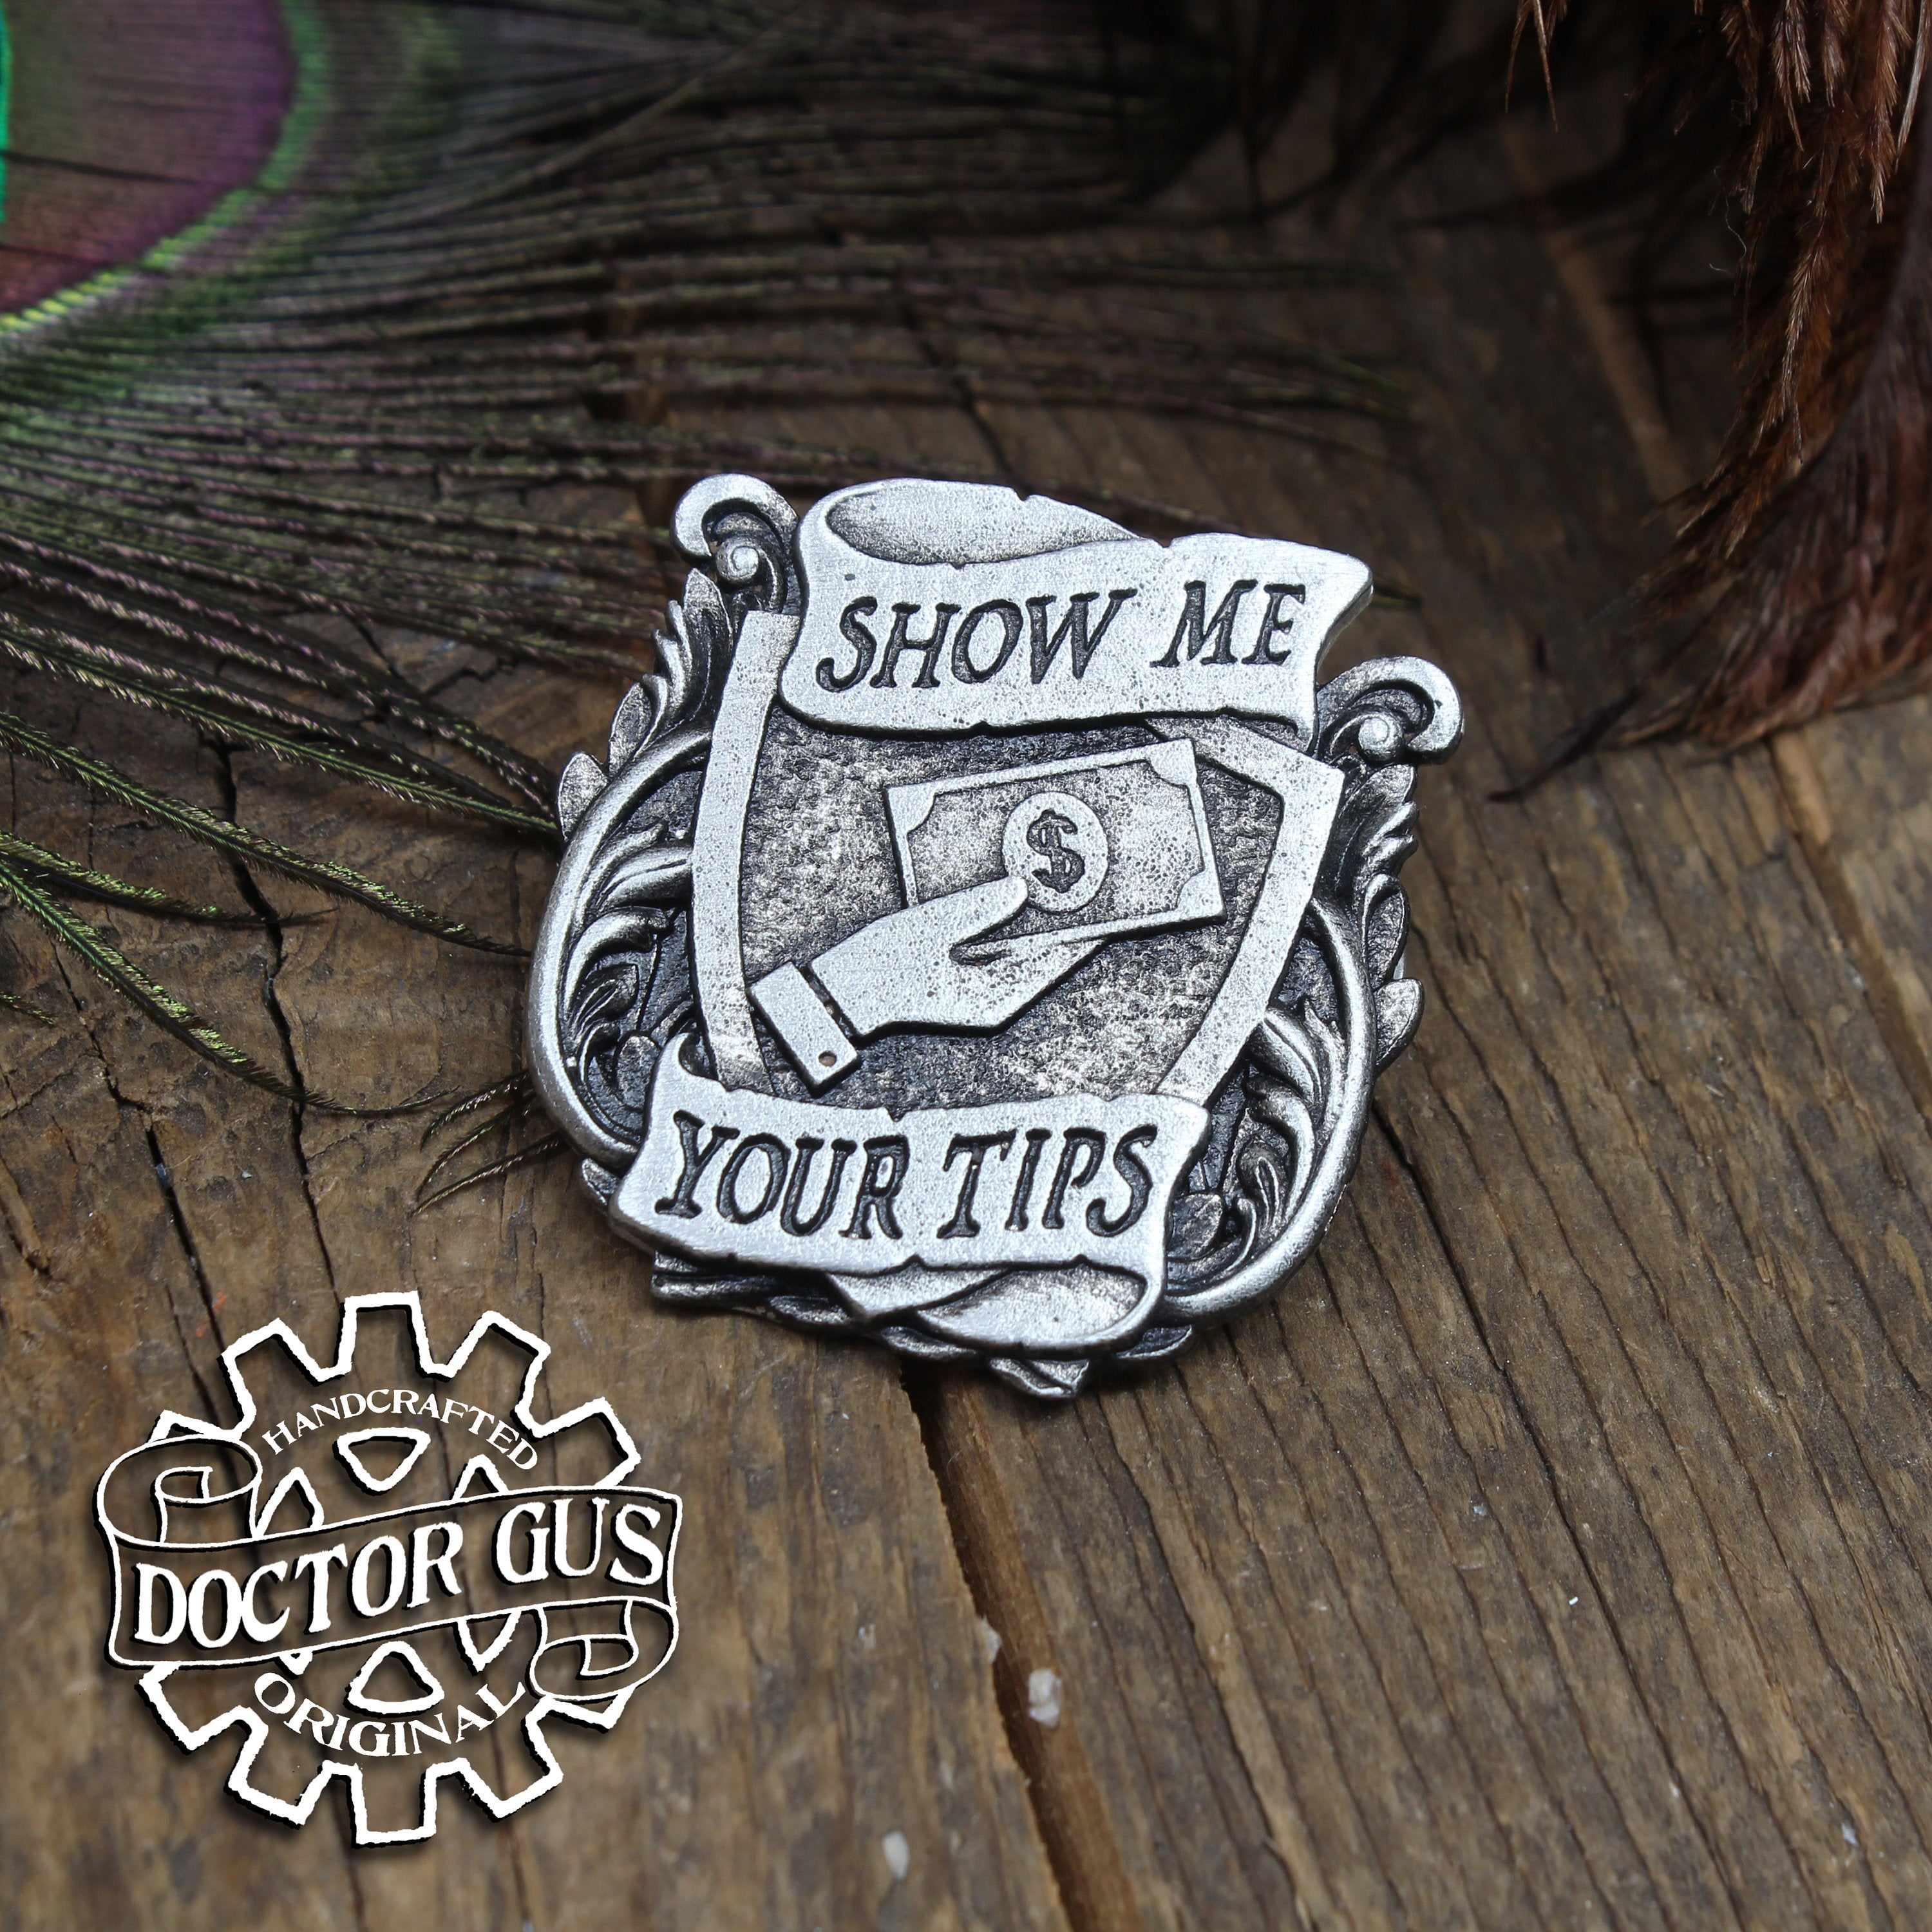 Show Me Your Tips Badge